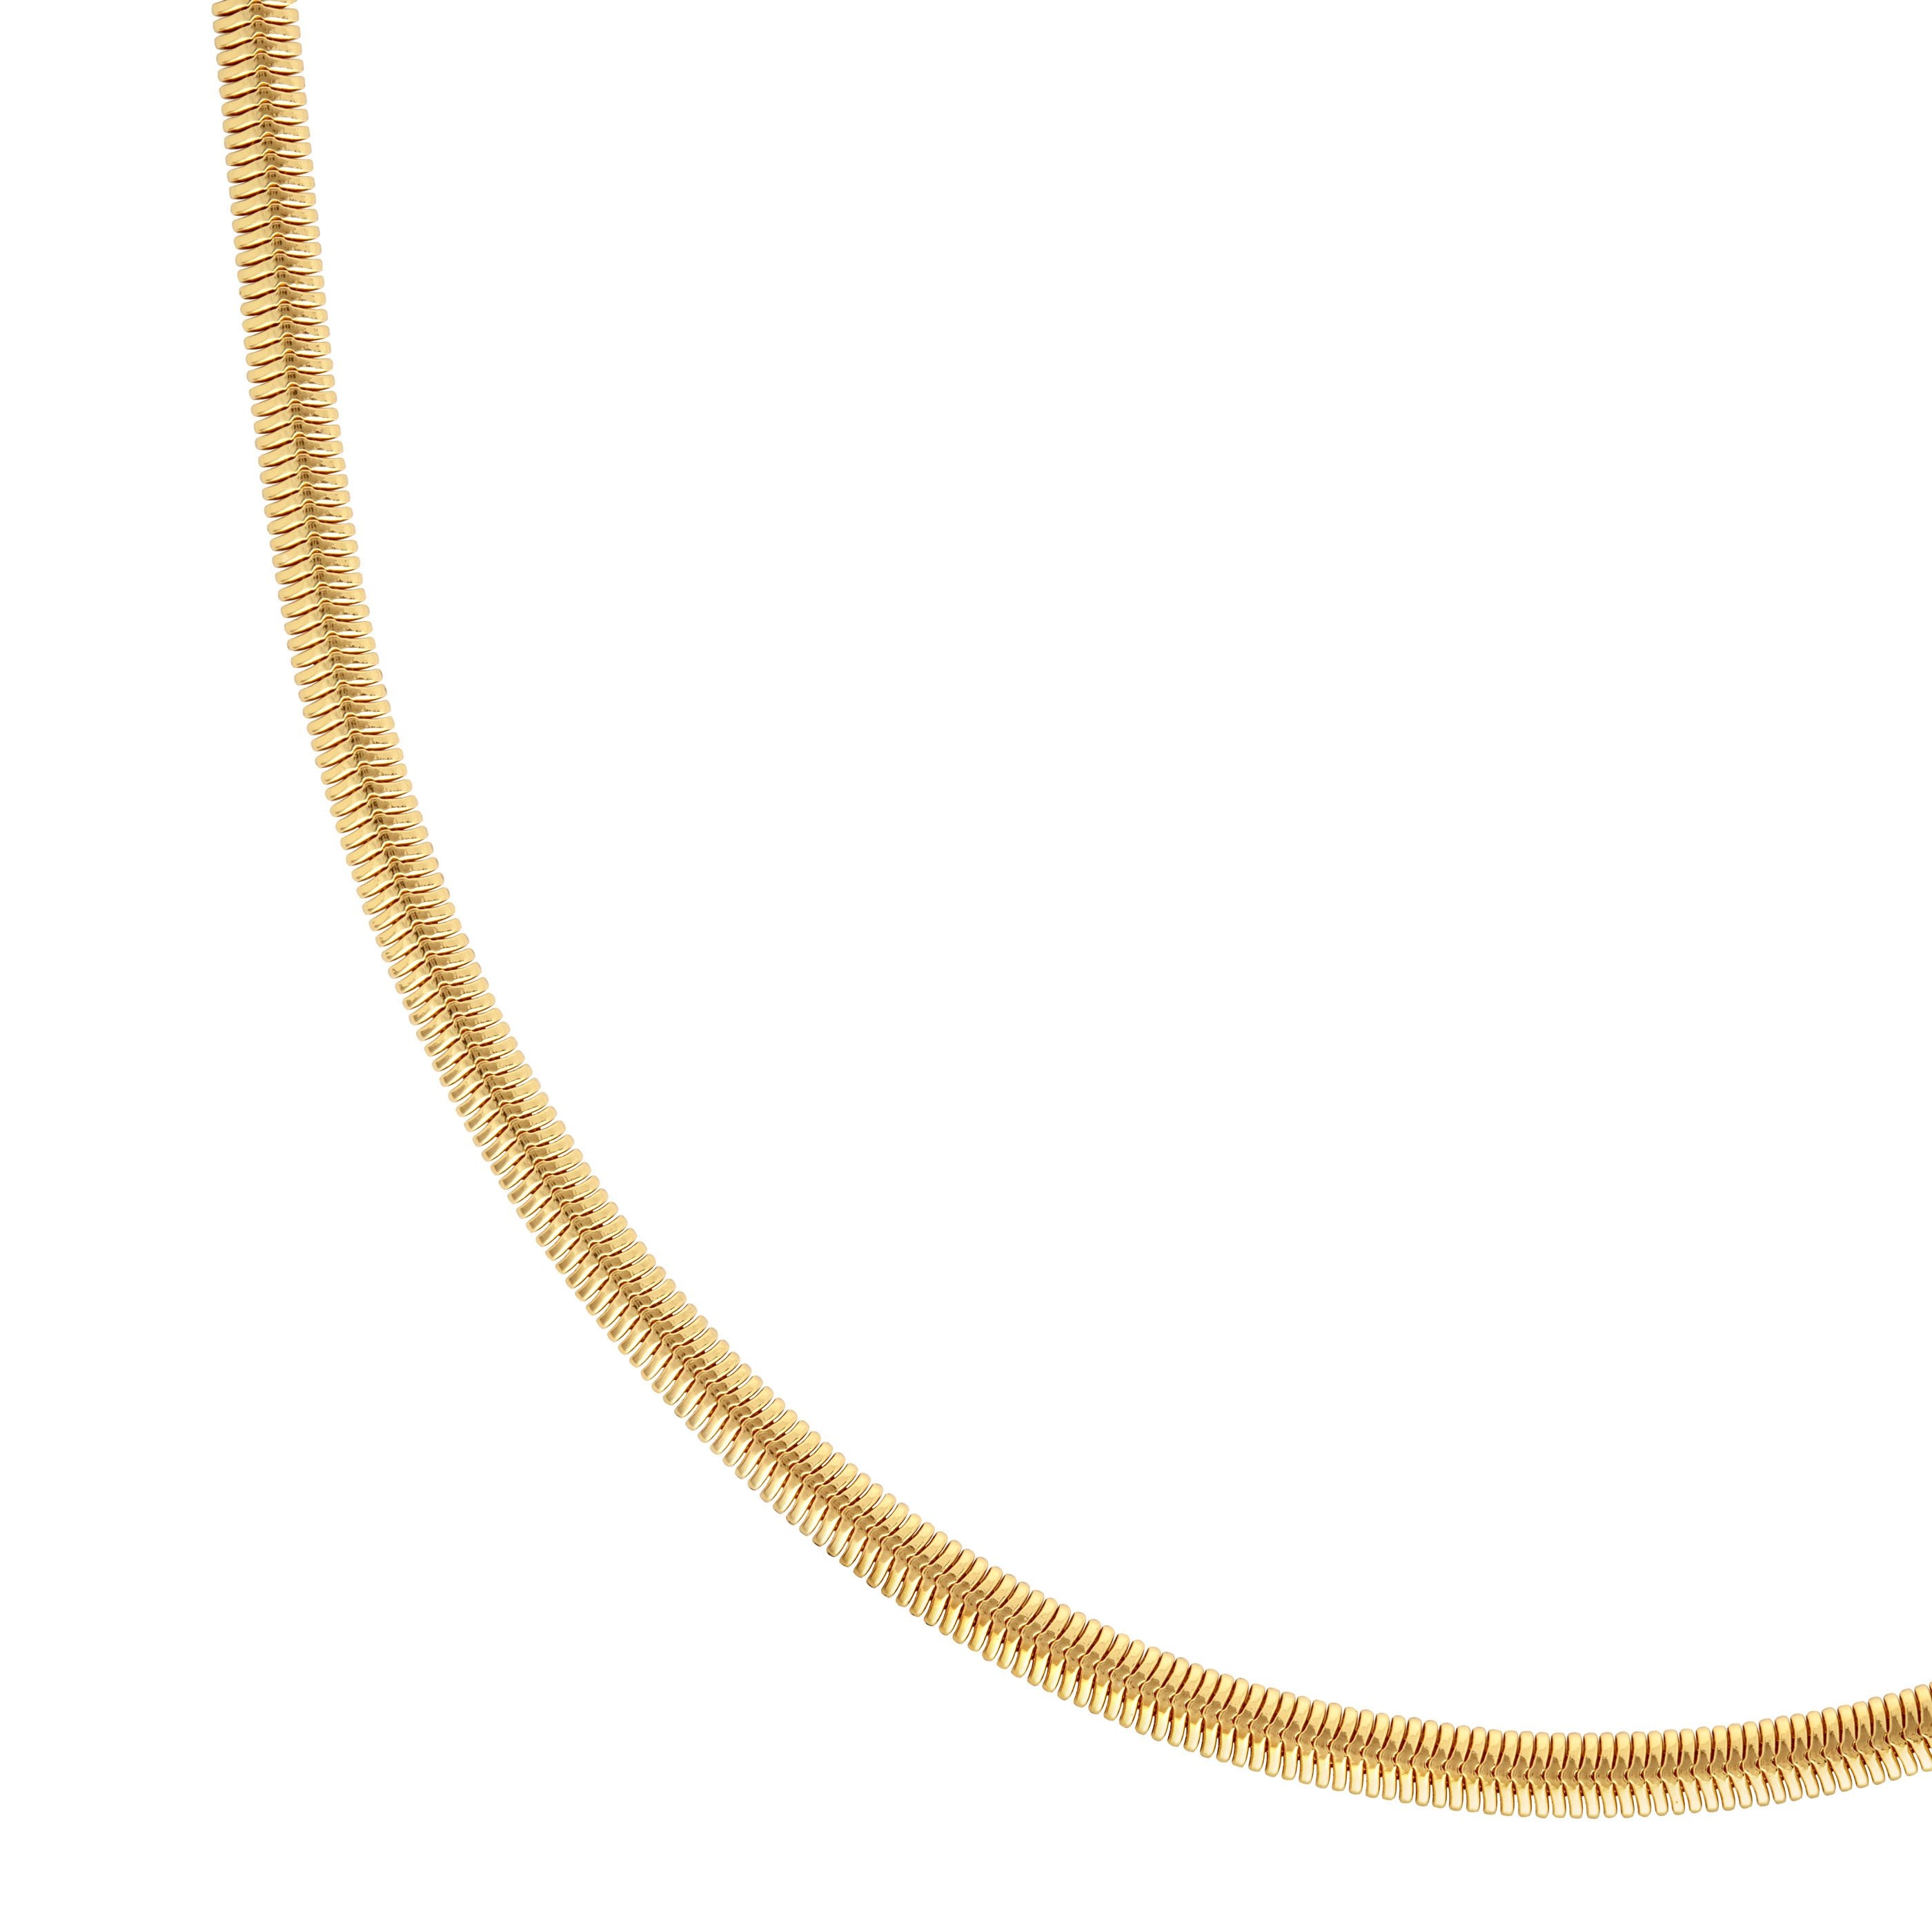 Oval Snake Chain Necklace in Gold